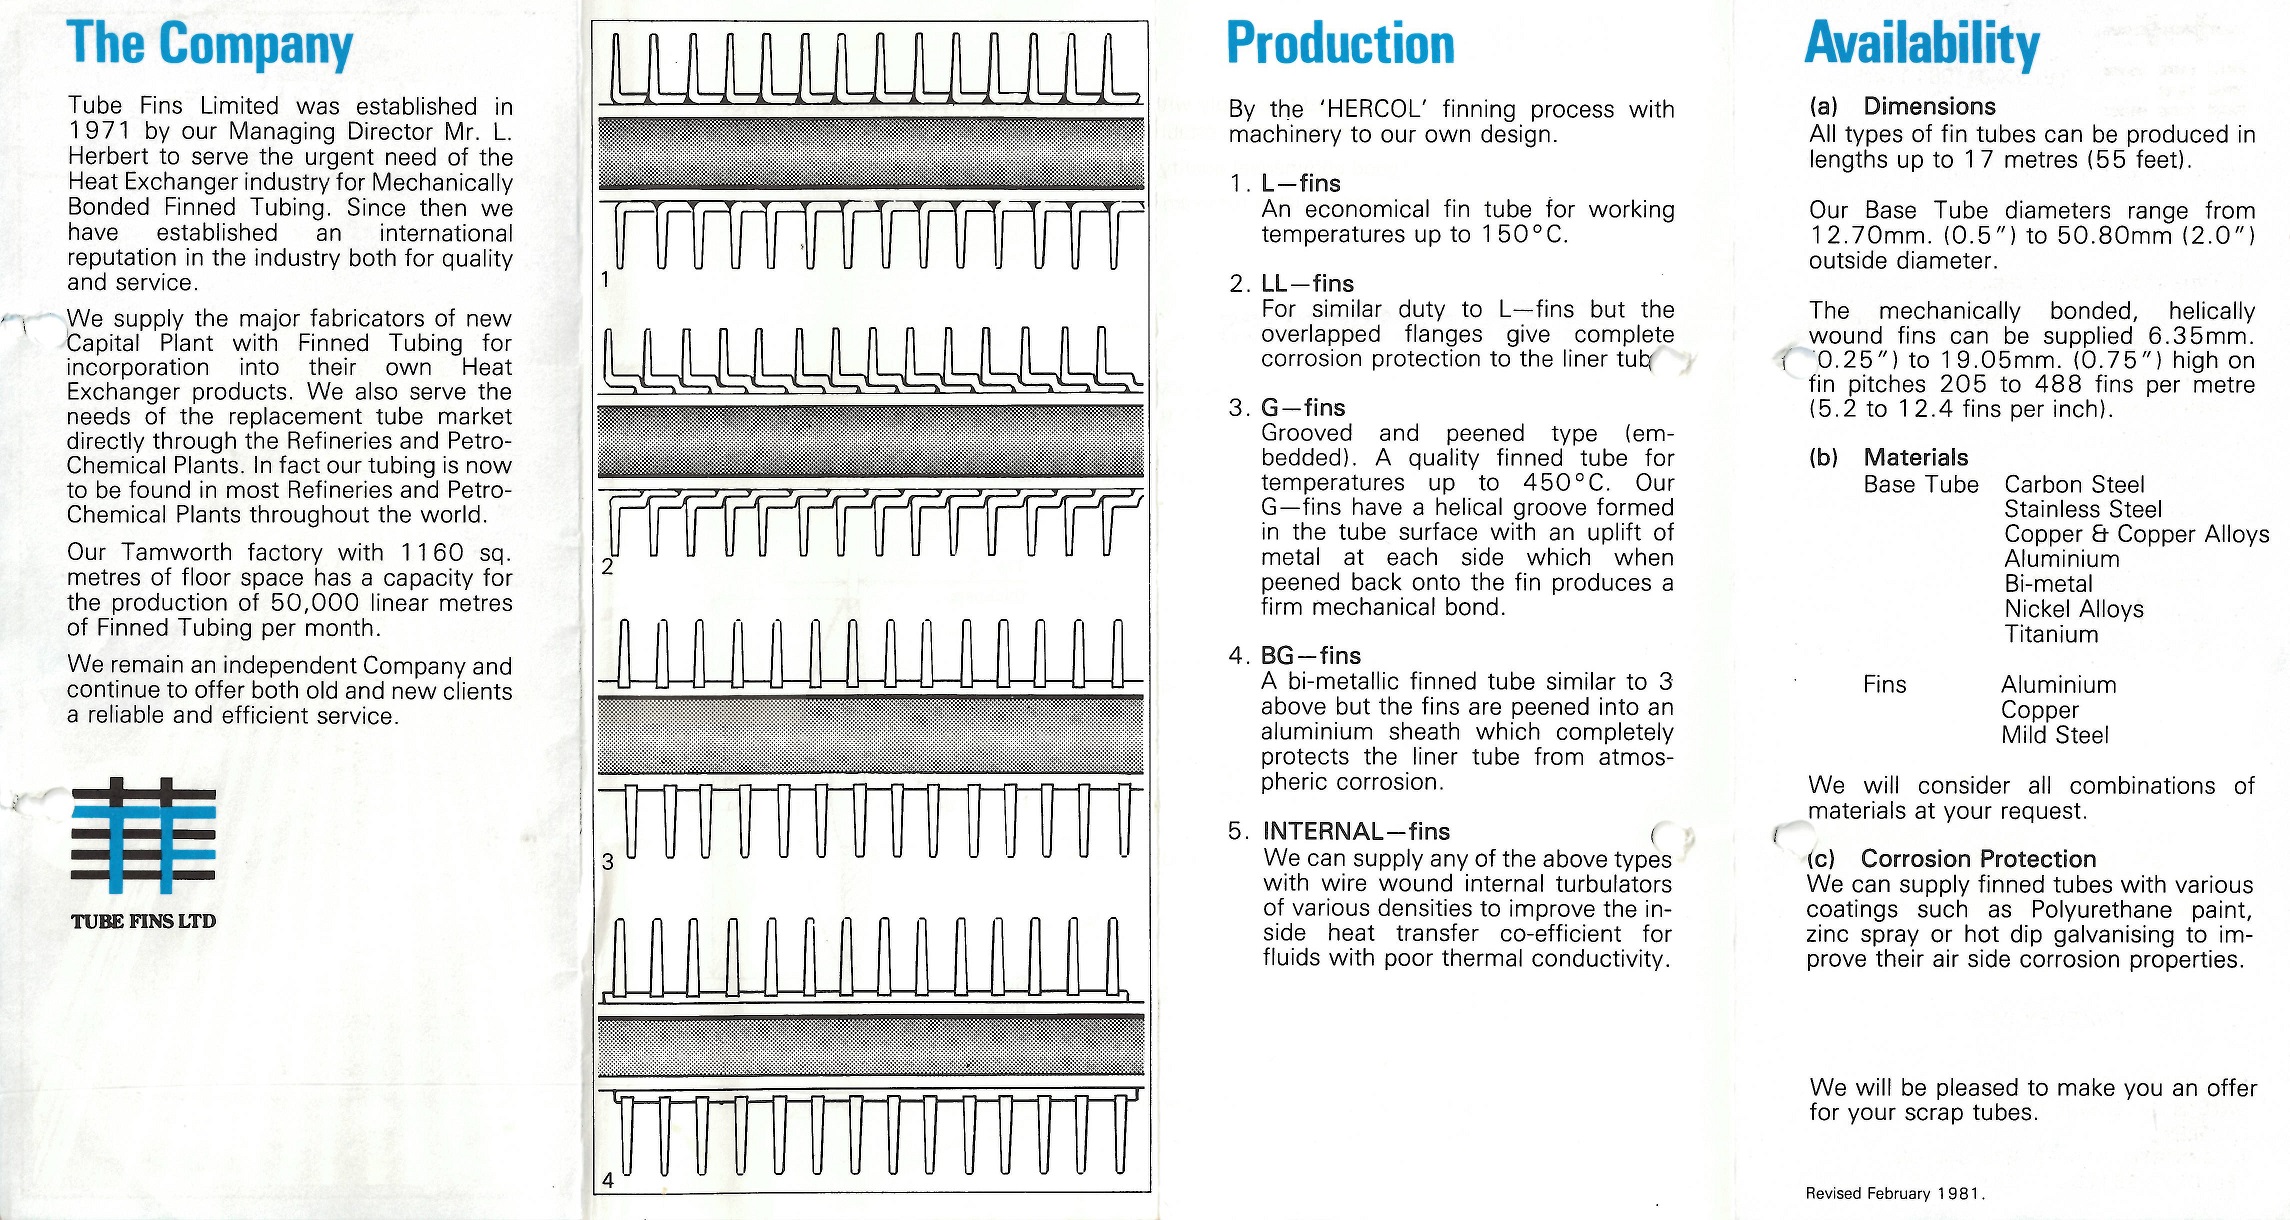 Scan of an old propmtional brochure